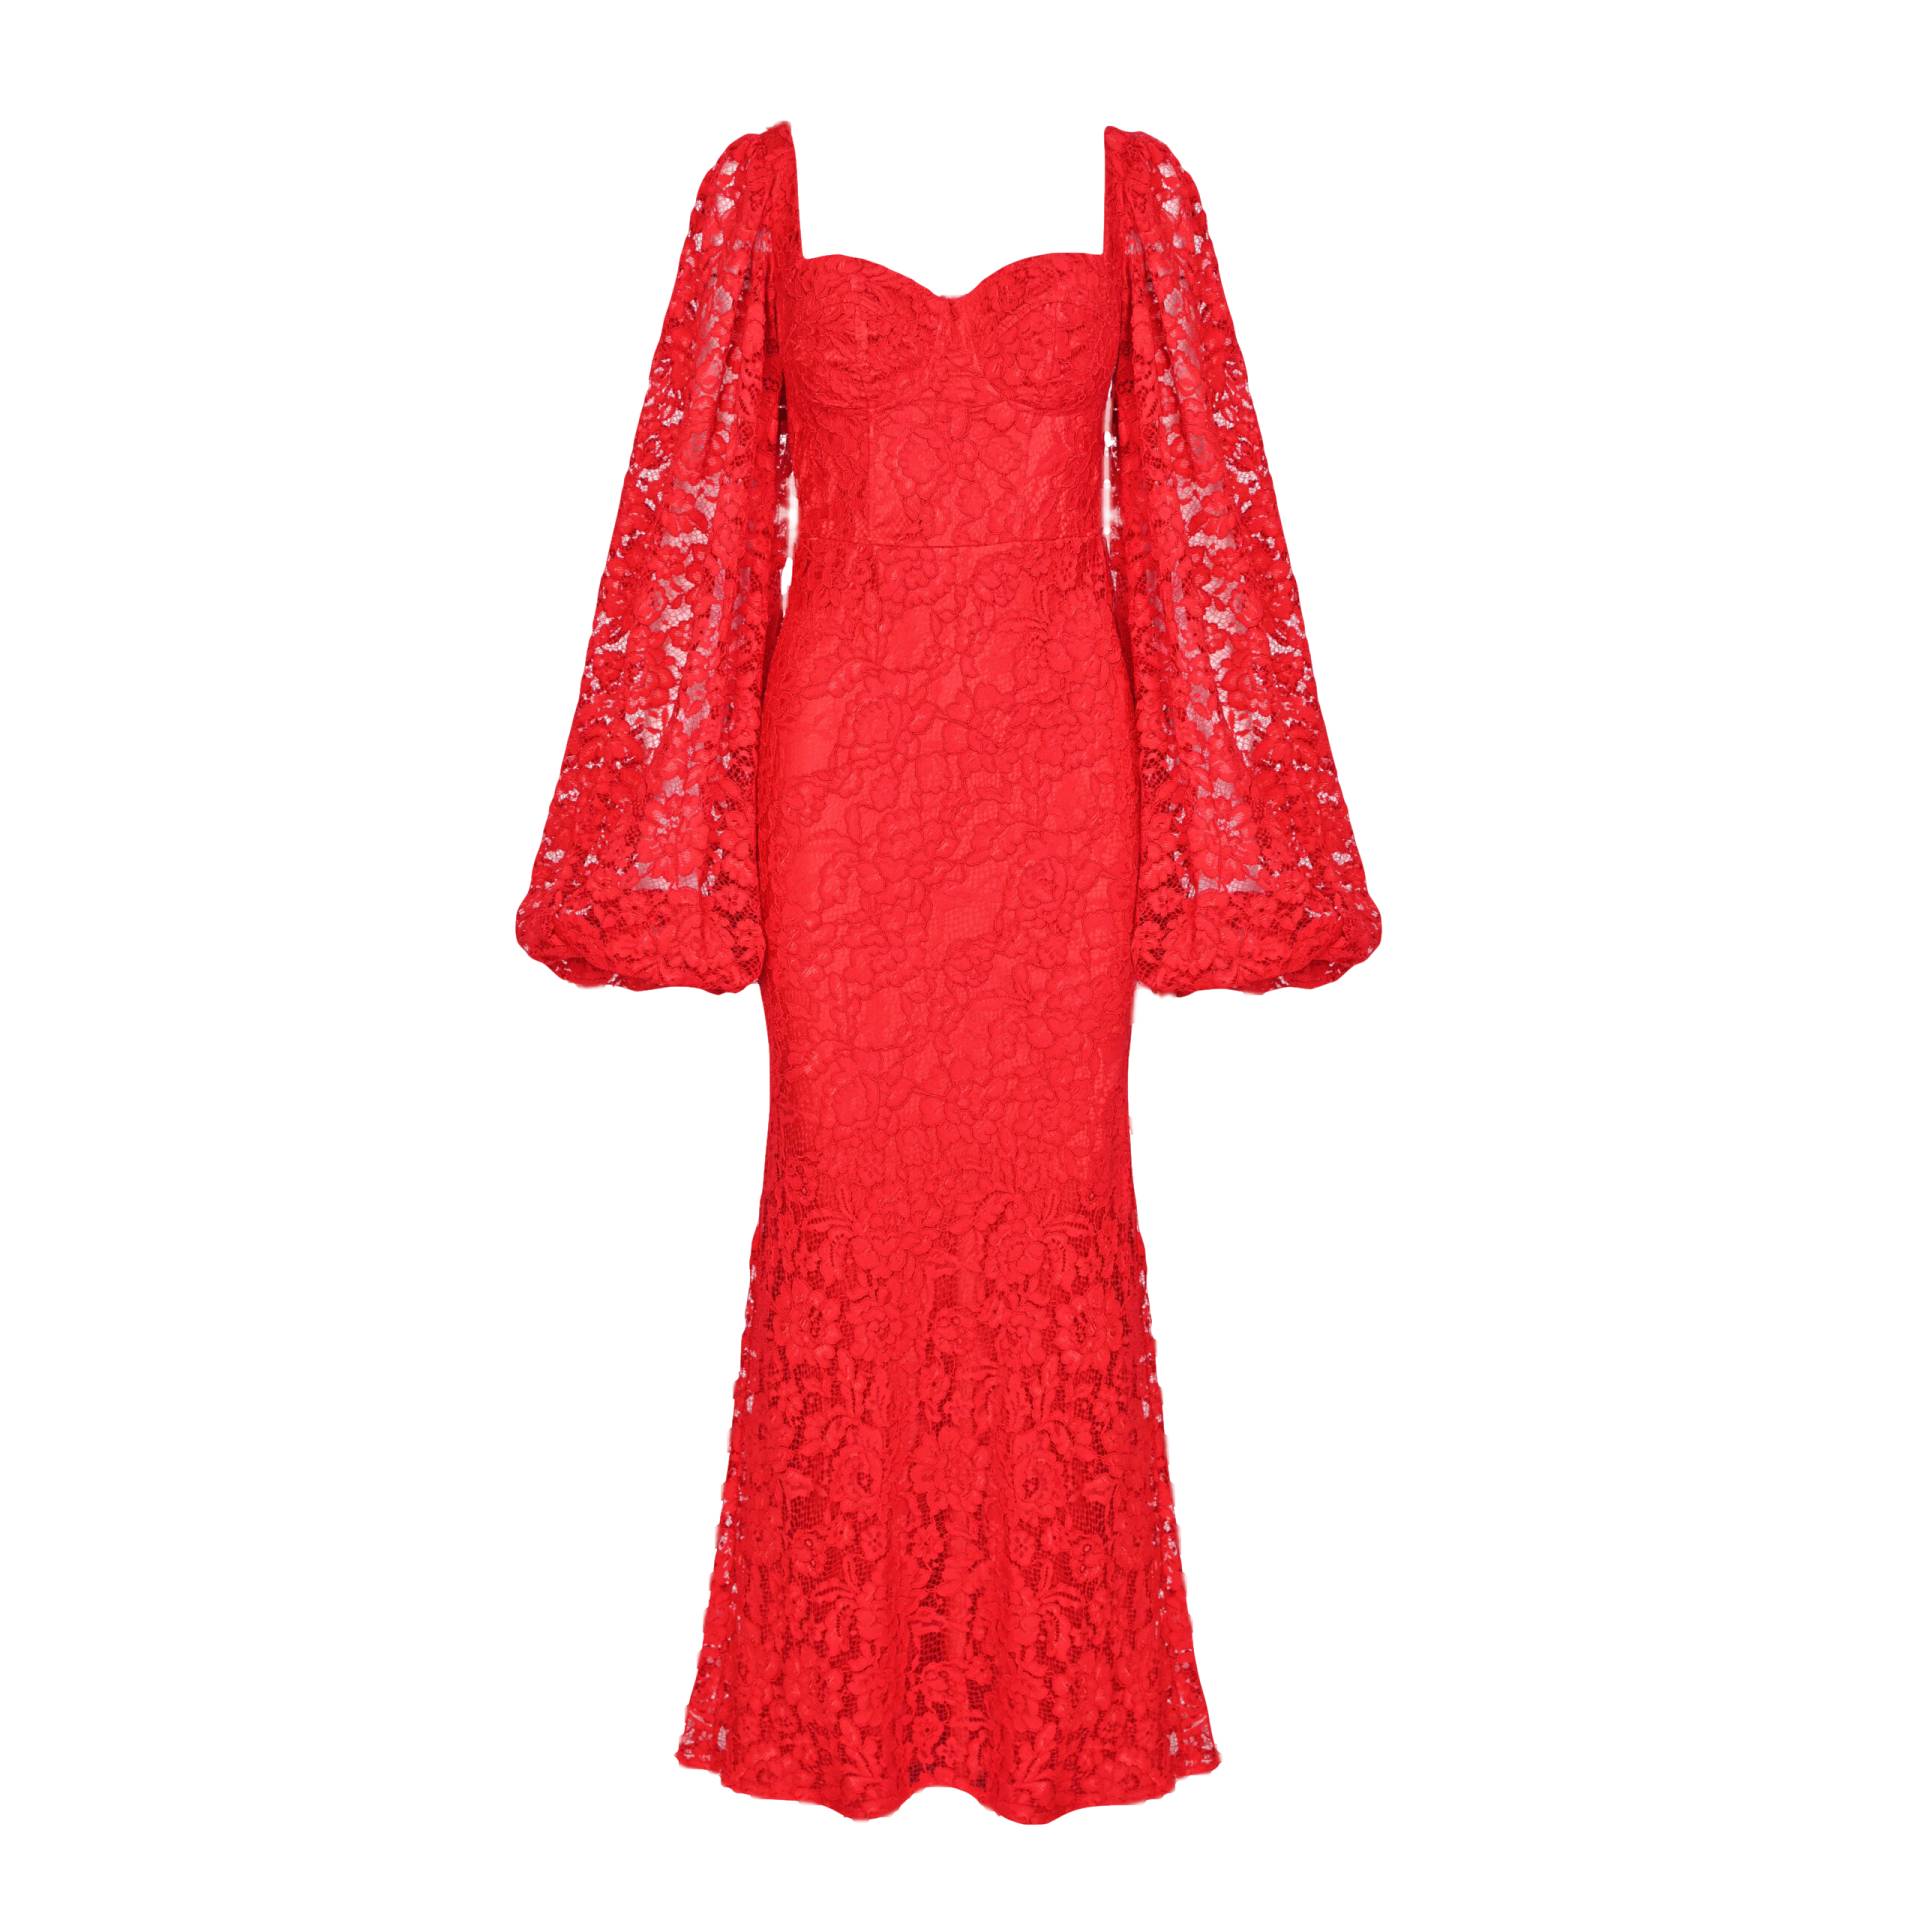 Red lace dress with sleeves - Rosette von Lily Was Here